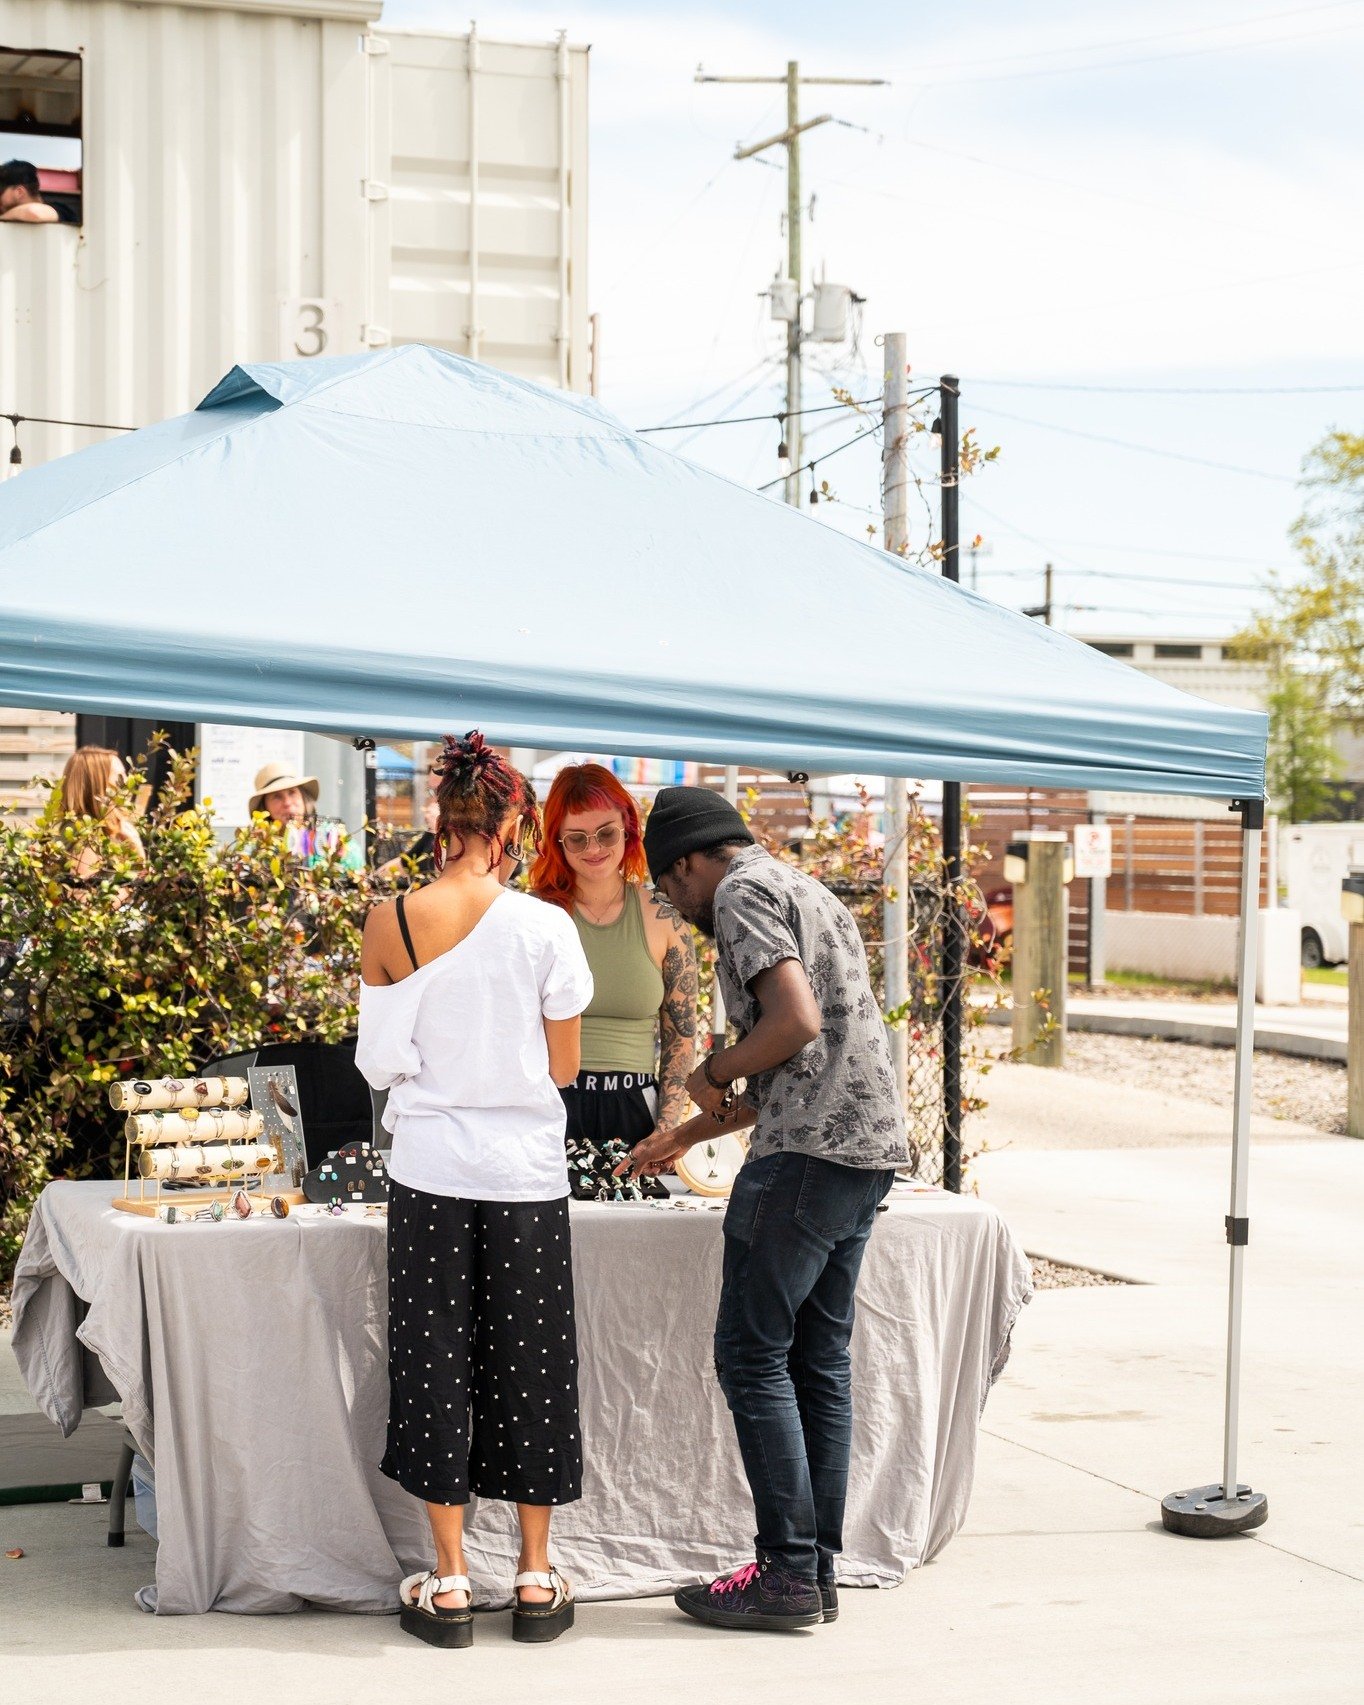 Another day, another market in the district. 😍 @hellopopupsilm wasn&rsquo;t going to let last weekend's rainout stop you from exploring all the awesome local vendors scheduled for this month, so the 3rd Sunday Market has been rescheduled to TODAY! ?